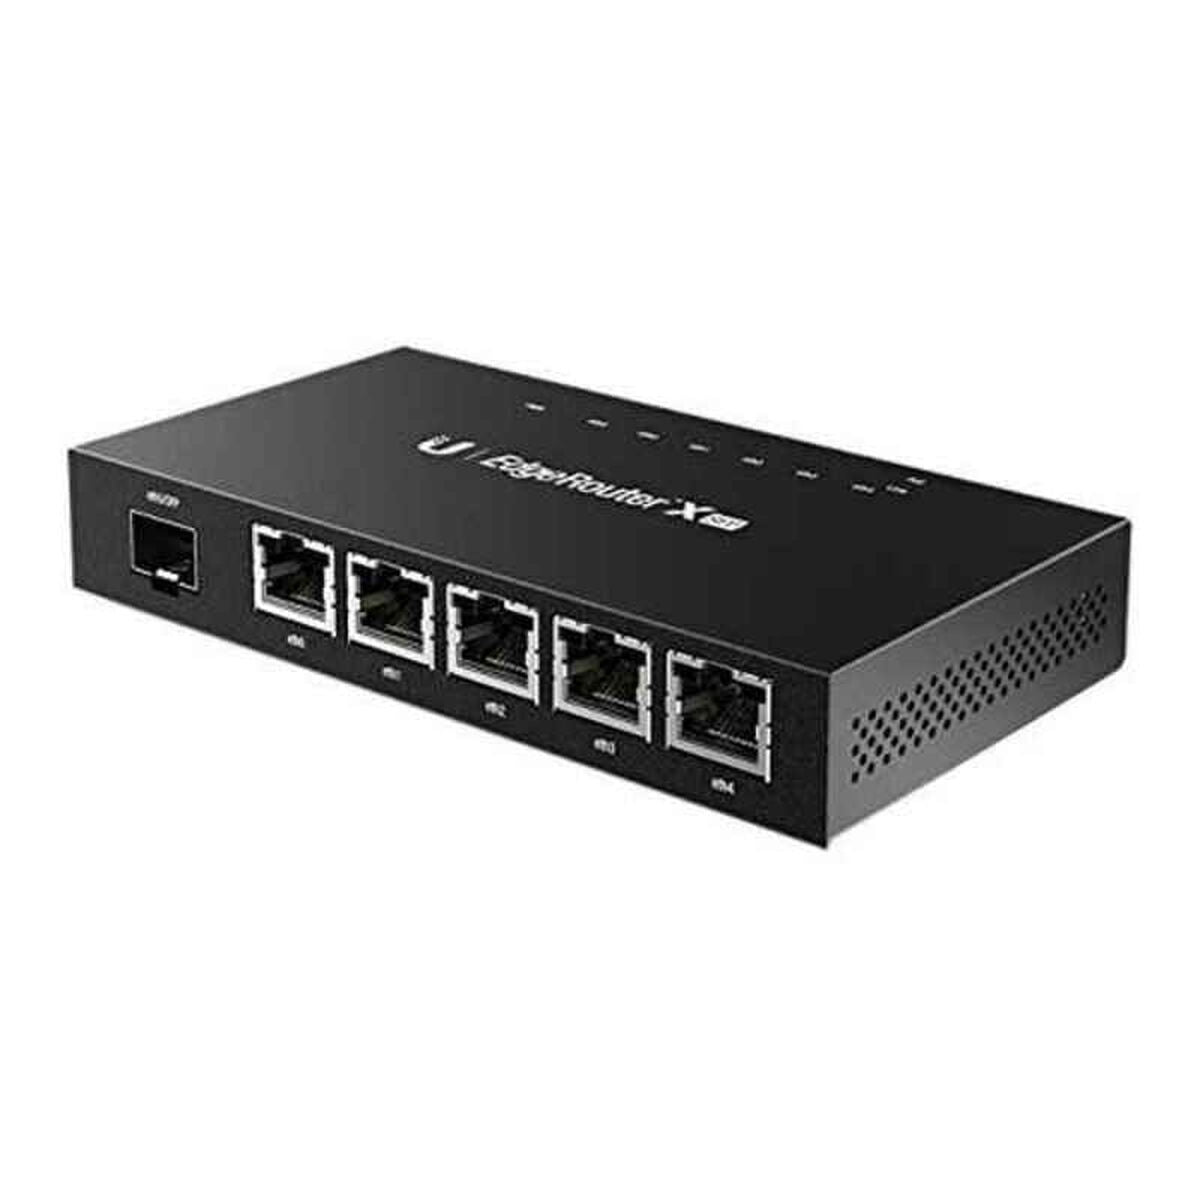 Router UBIQUITI ER-X-SFP Ethernet LAN x 5 SFP x 1, UBIQUITI, Computing, Network devices, router-ubiquiti-er-x-sfp-ethernet-lan-x-5-sfp-x-1, Brand_UBIQUITI, category-reference-2609, category-reference-2803, category-reference-2826, category-reference-t-19685, category-reference-t-19914, Condition_NEW, networks/wiring, Price_50 - 100, Teleworking, RiotNook